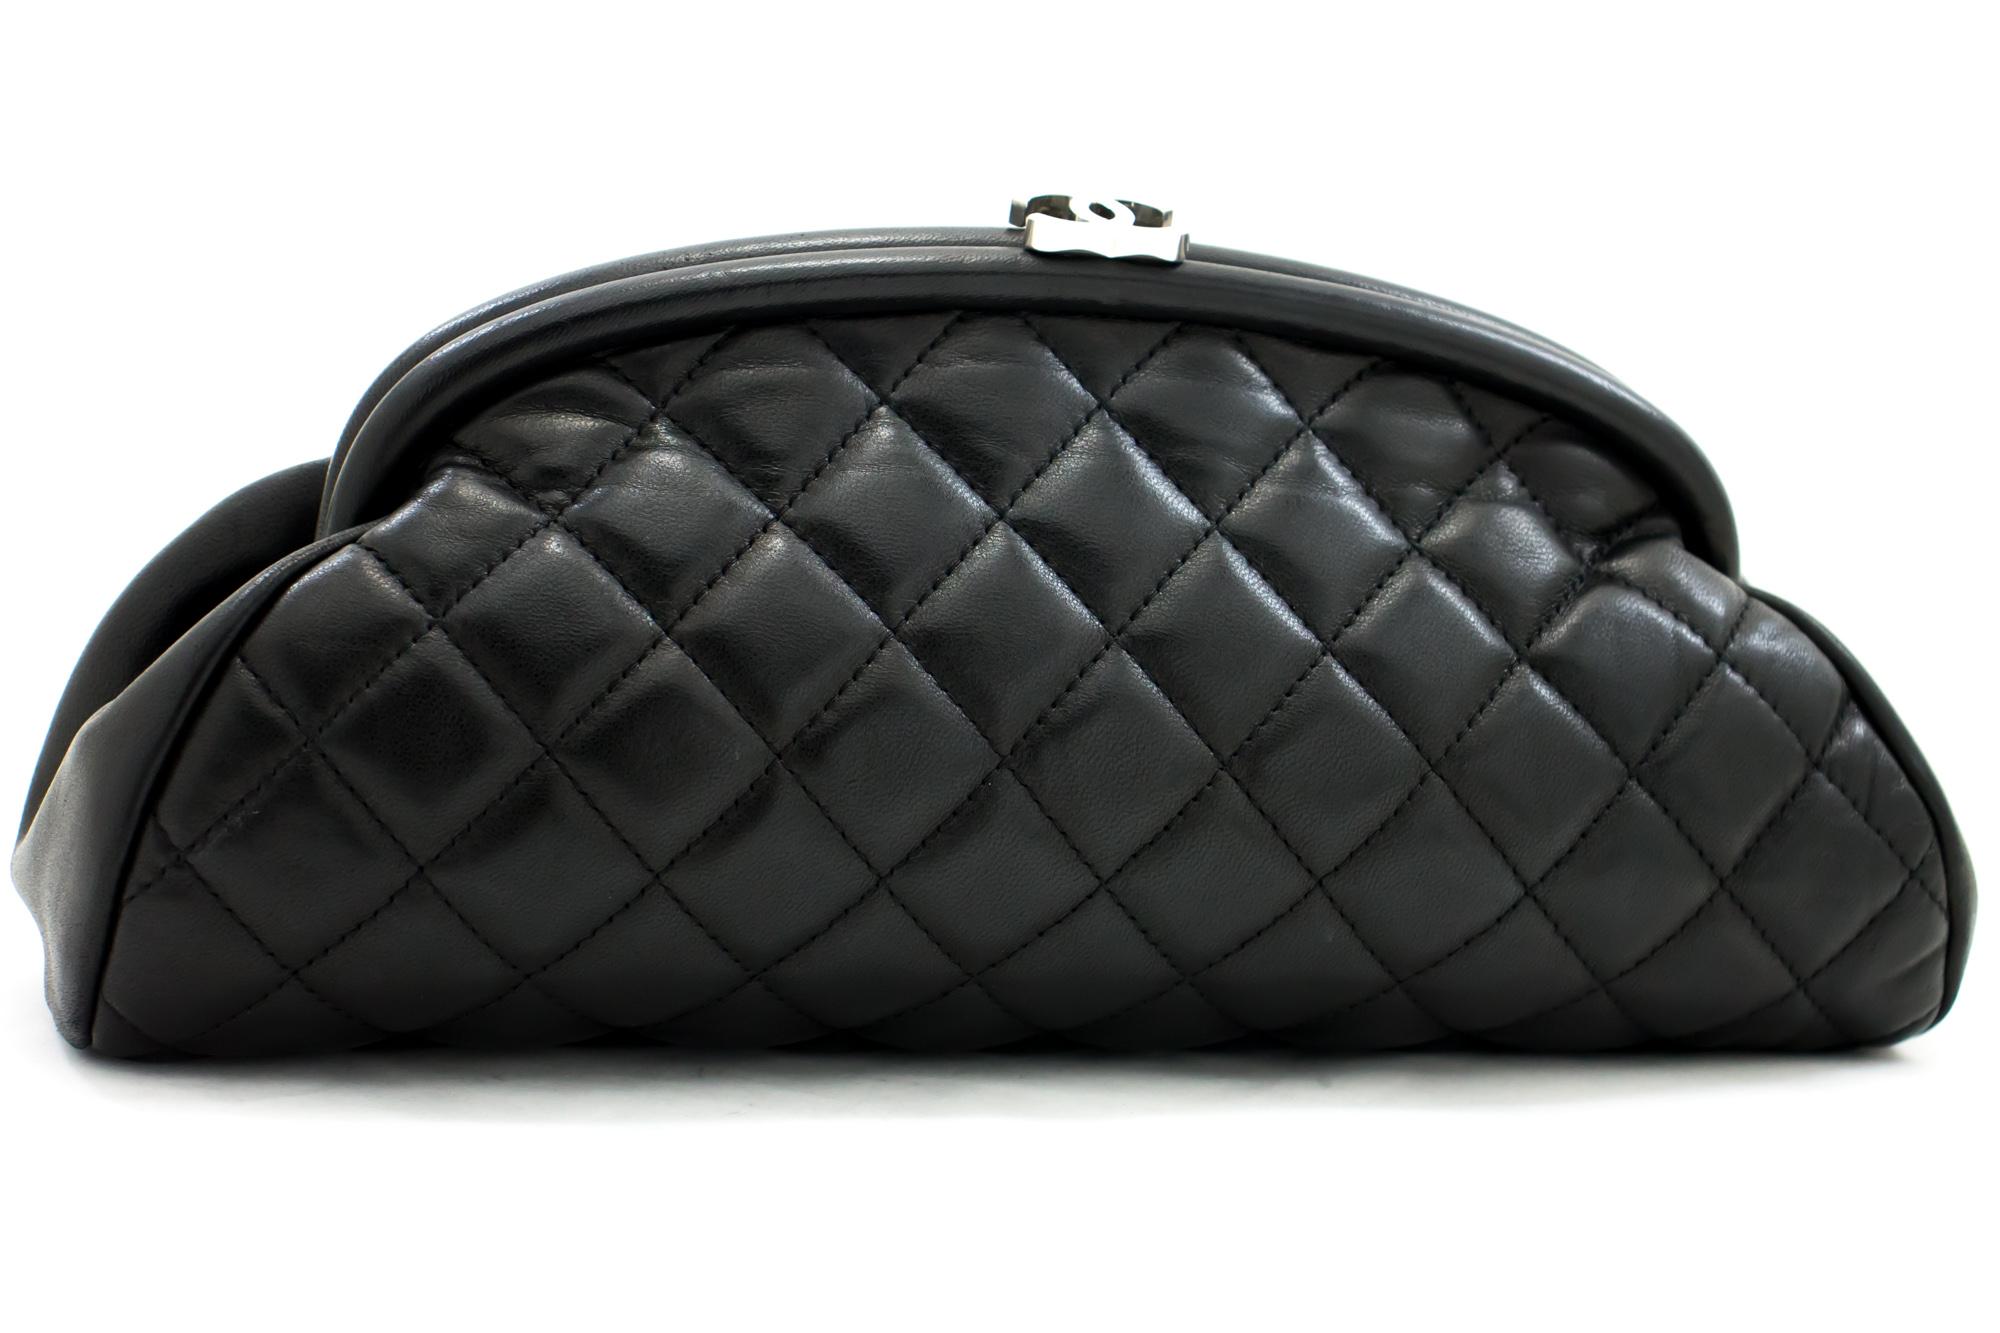 An authentic CHANEL made of black Lambskin Timeless Clutch Bag Black Quilted Silver Hardware. The color is Black. The outside material is Leather. The pattern is Solid. This item is Contemporary. The year of manufacture would be 2006.
Conditions &